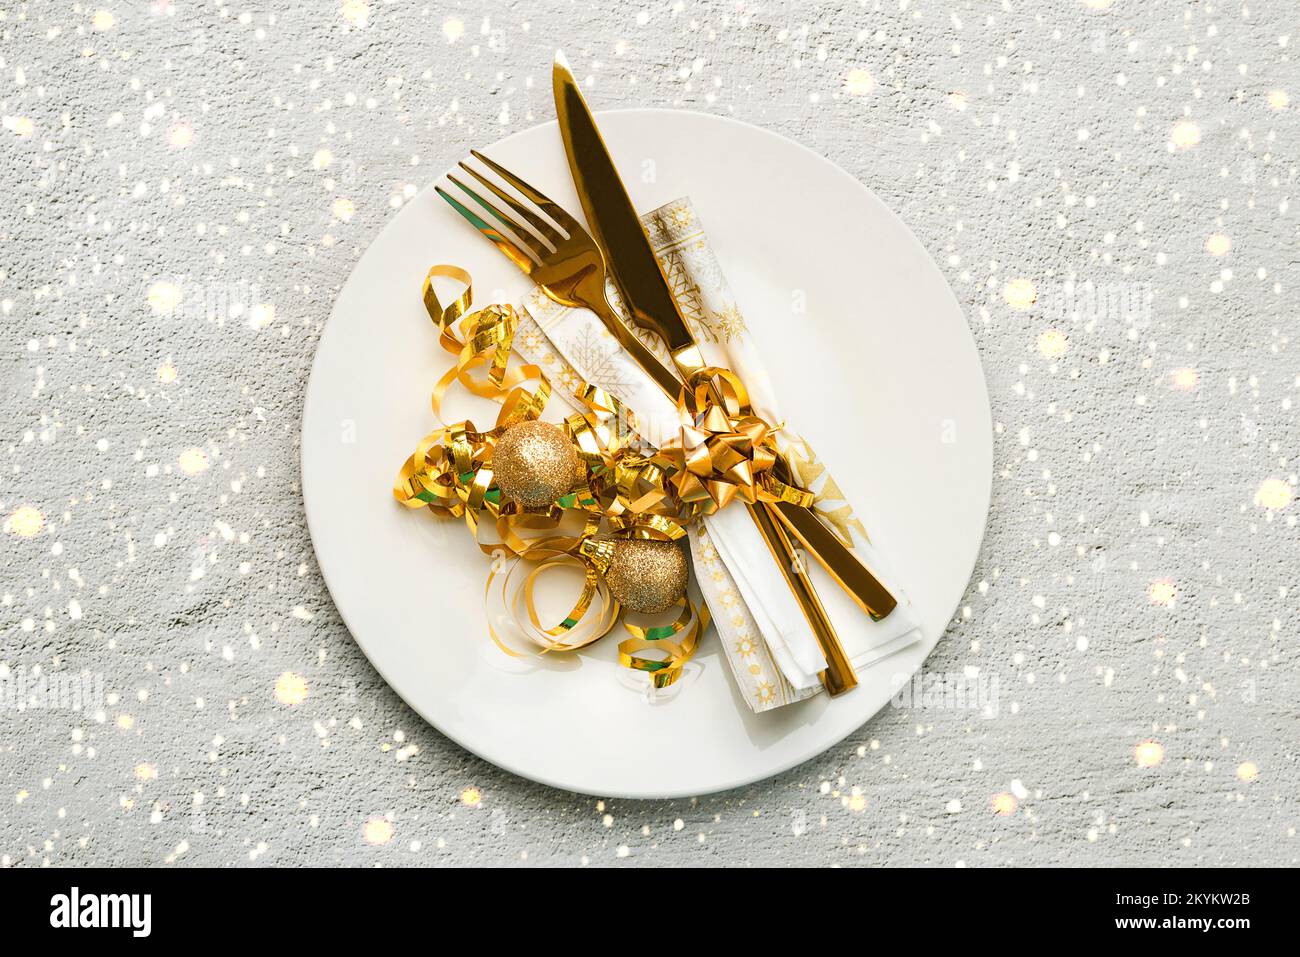 Christmas dinner concept. Top view of golden cutlery on a plate with snowflakes and christmas lights over black background Stock Photo